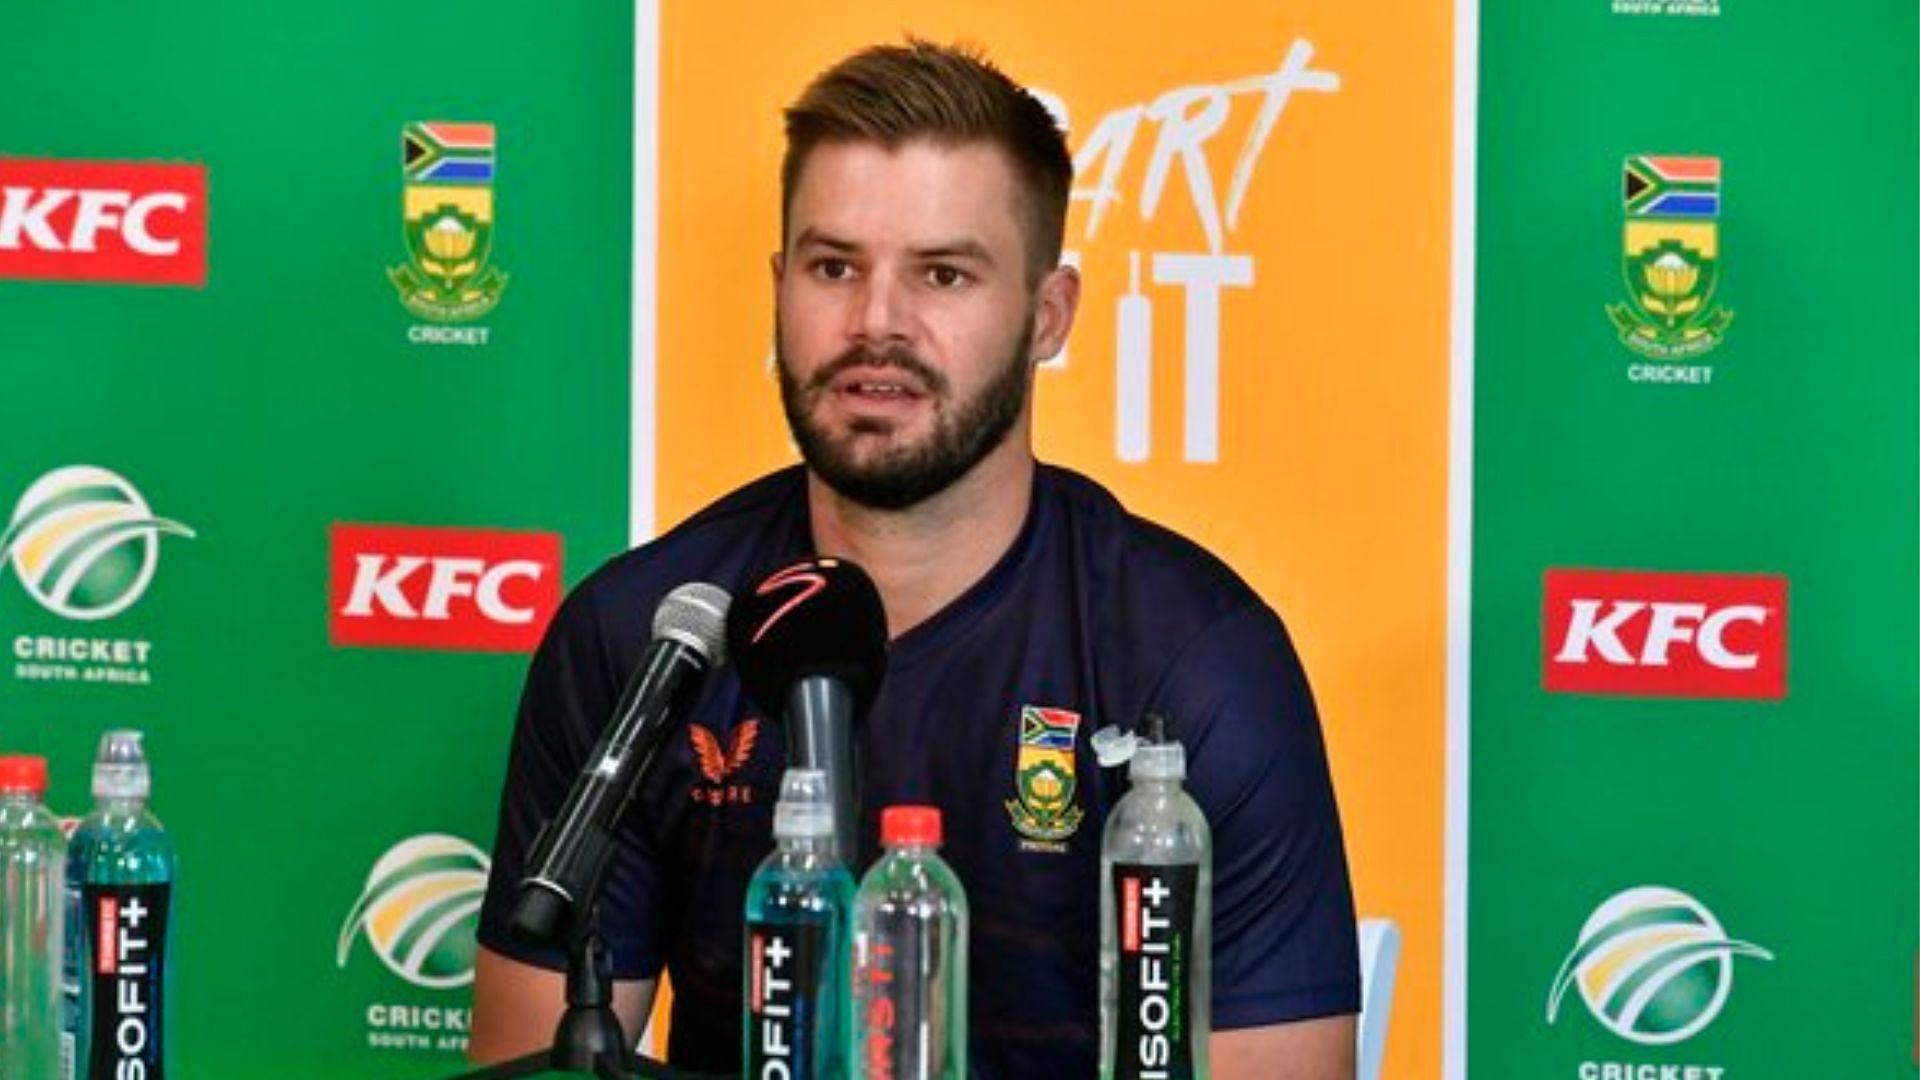 Aiden Markram has established himself as an all-format player for South Africa.